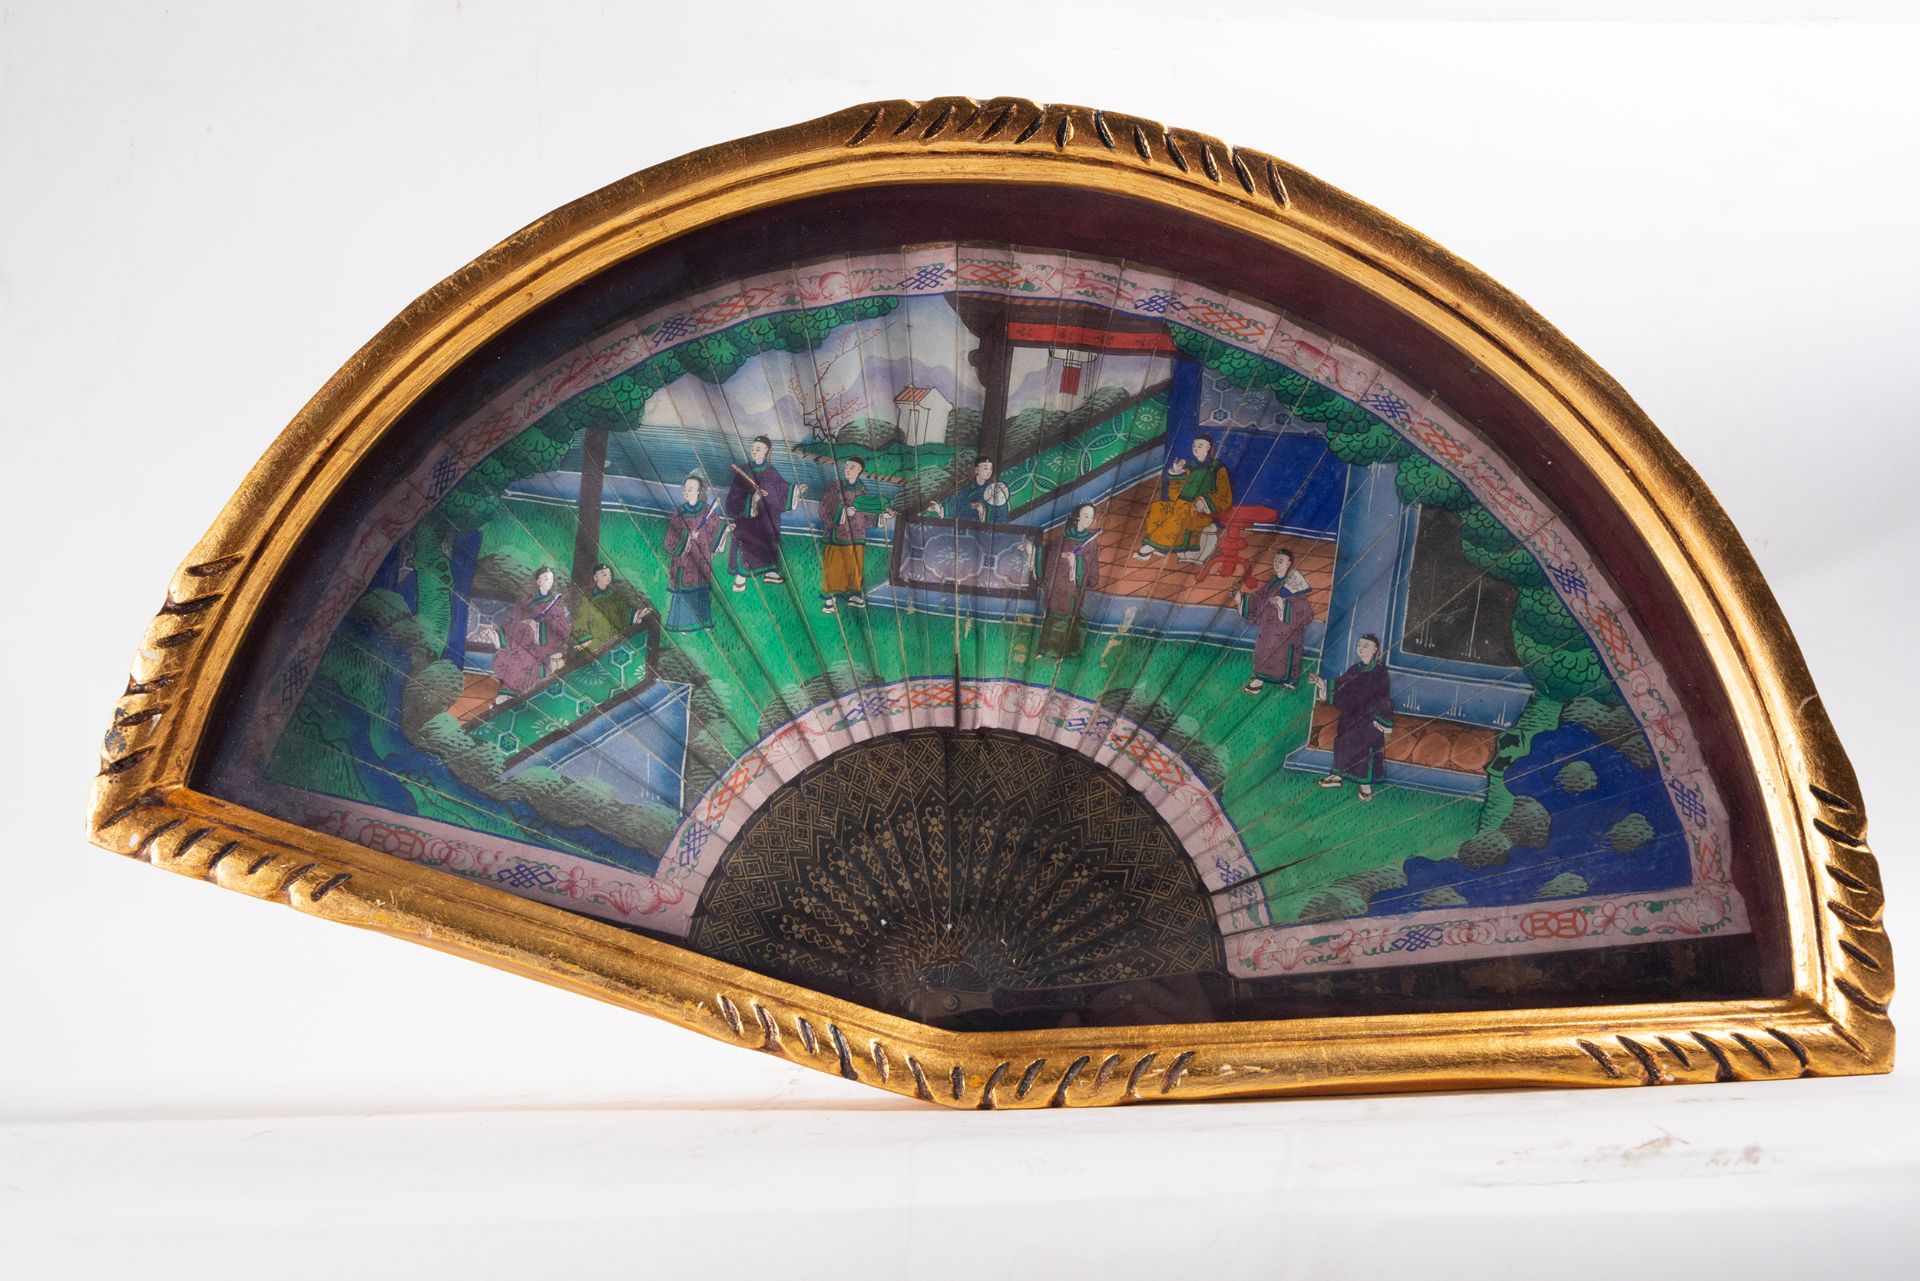 Chinese hand-painted fan depicting a court scene, 19th century